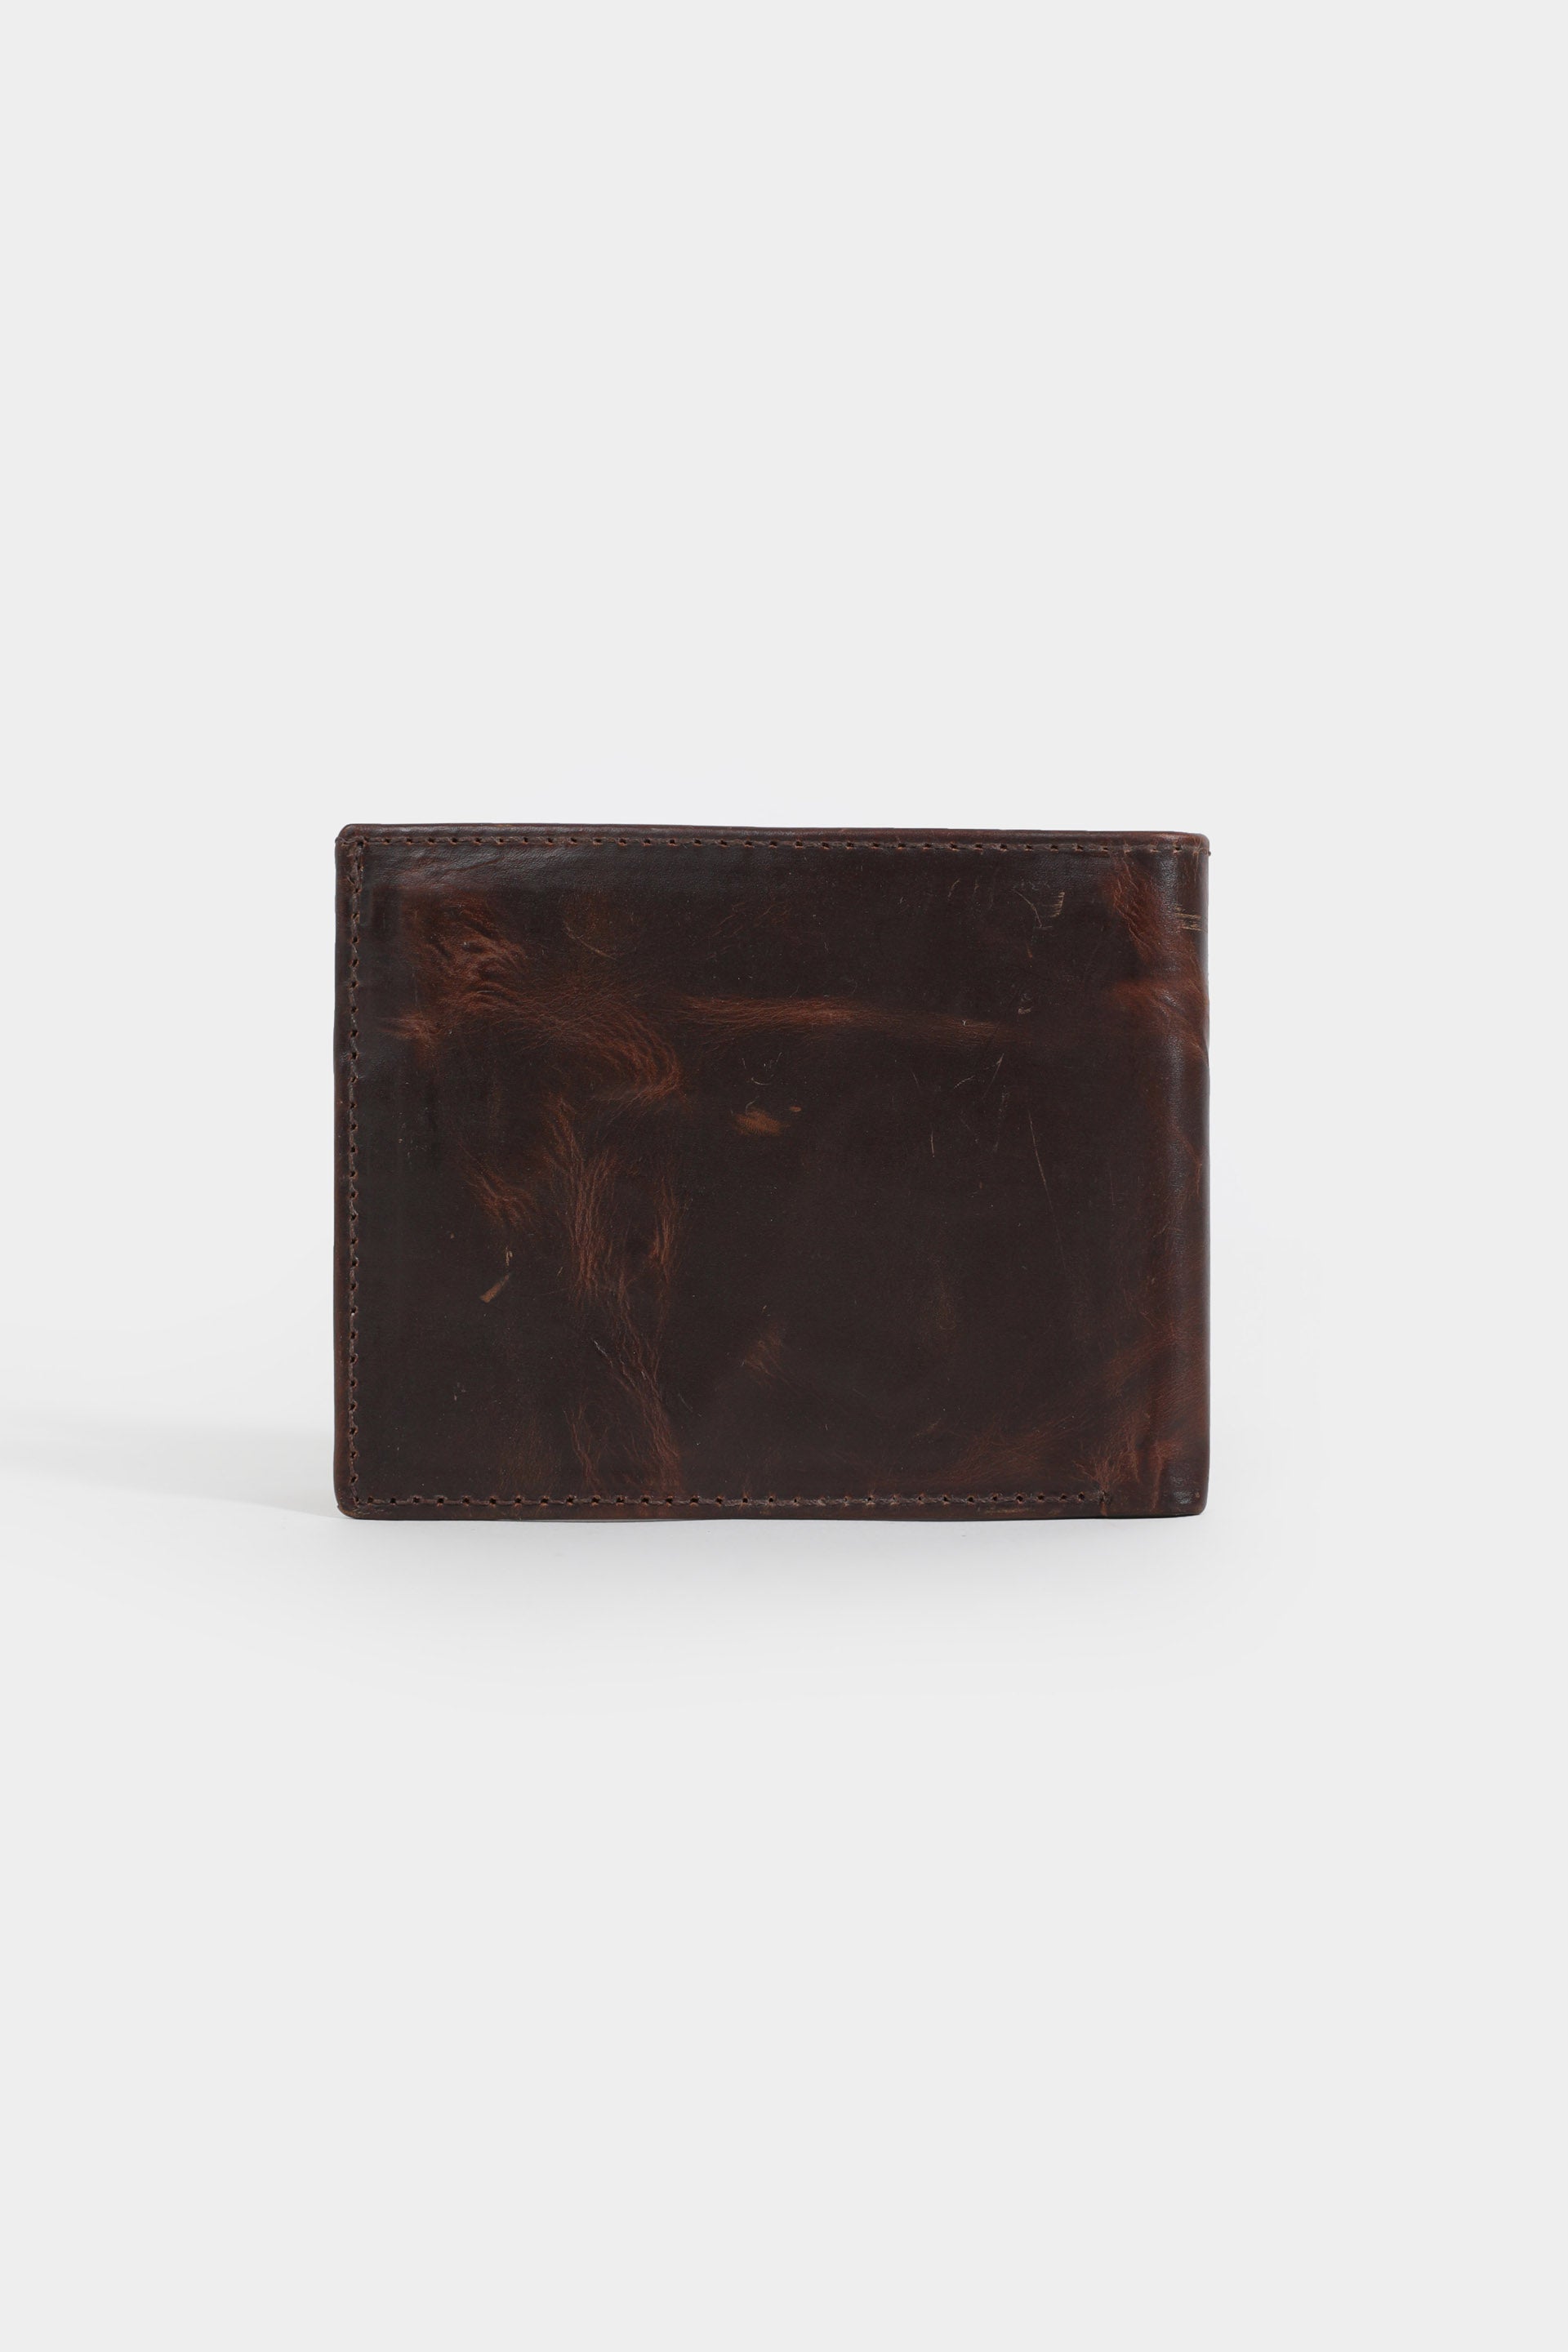 textured leather contrast wallet